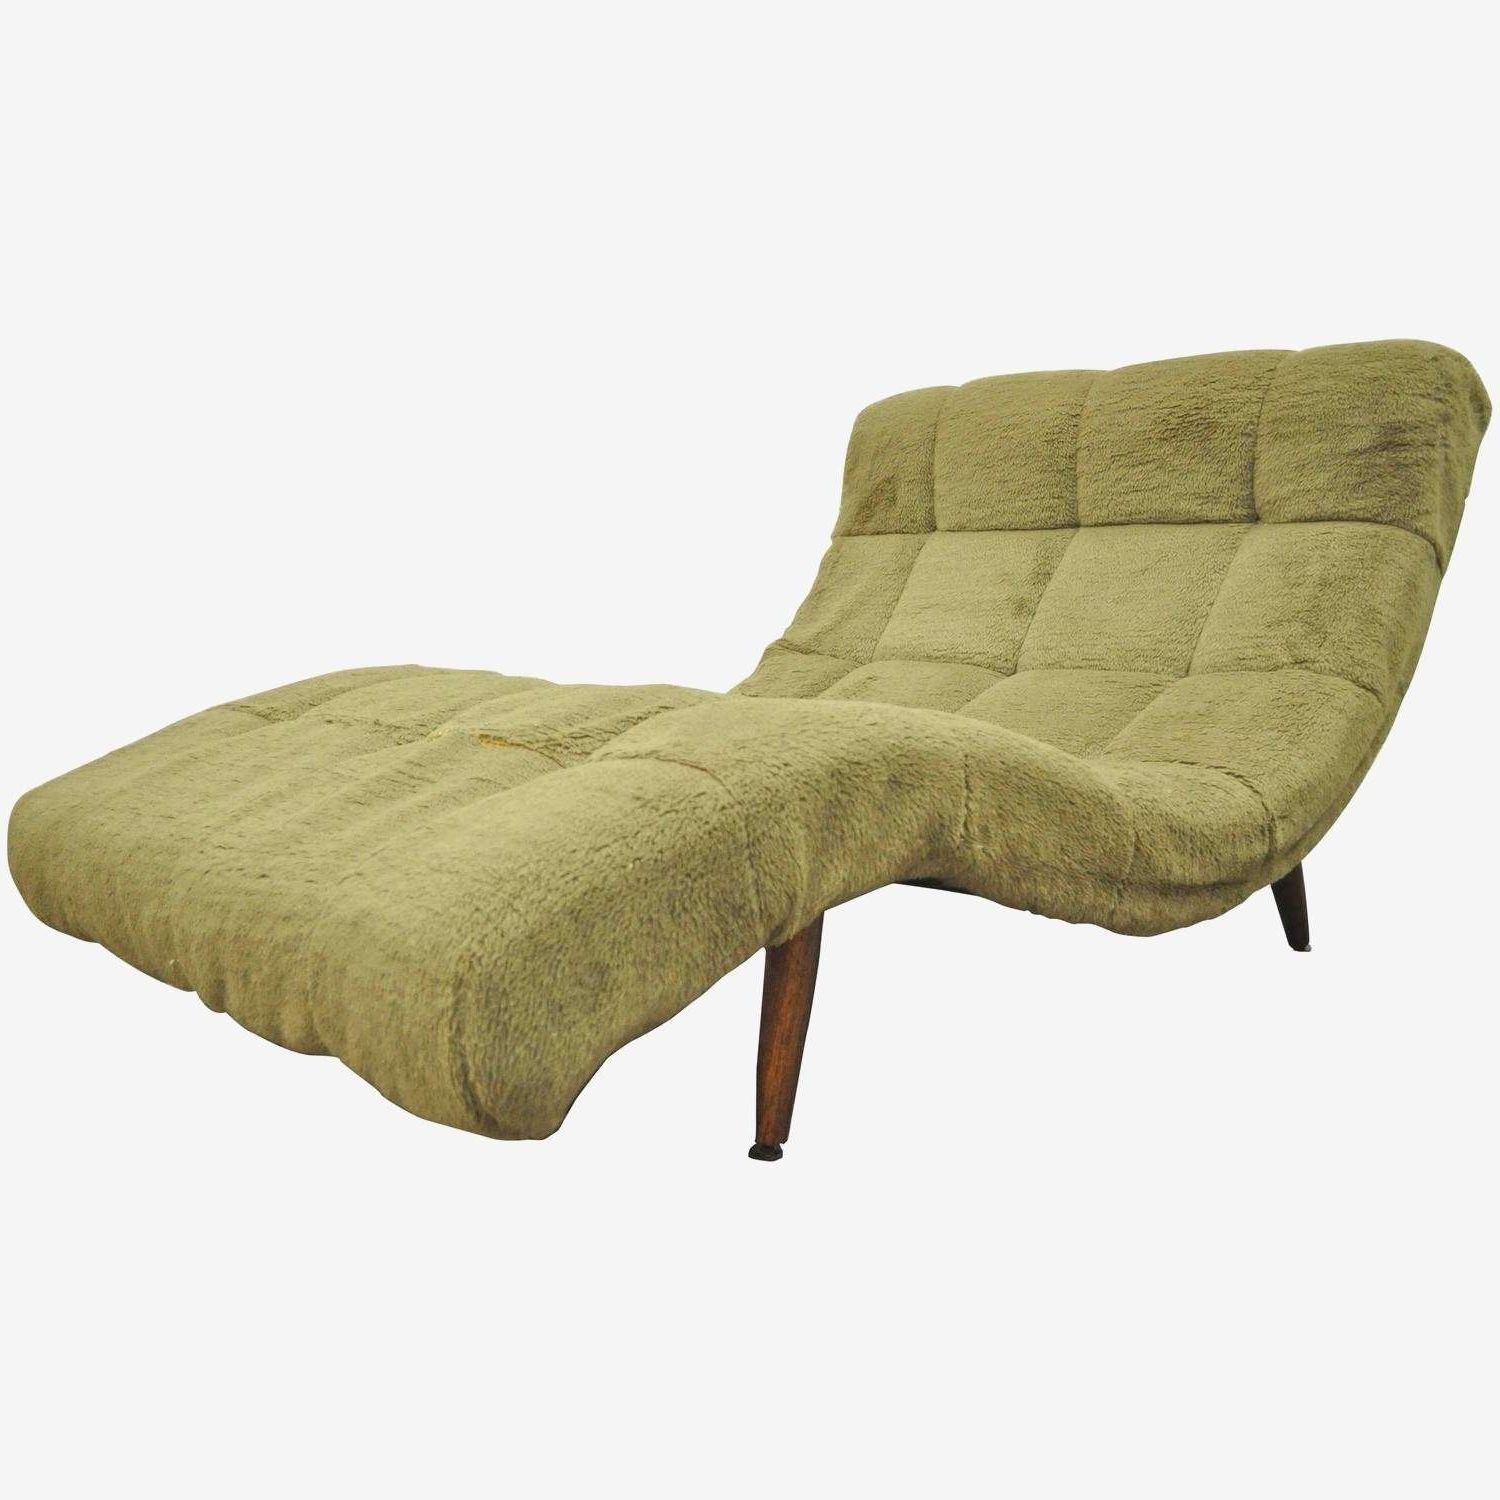 Contemporary Chaise Lounge Chairs For Best And Newest Modern Chaise Lounge Chairs Fancy Midcentury Modern Double Wide (Photo 12 of 15)